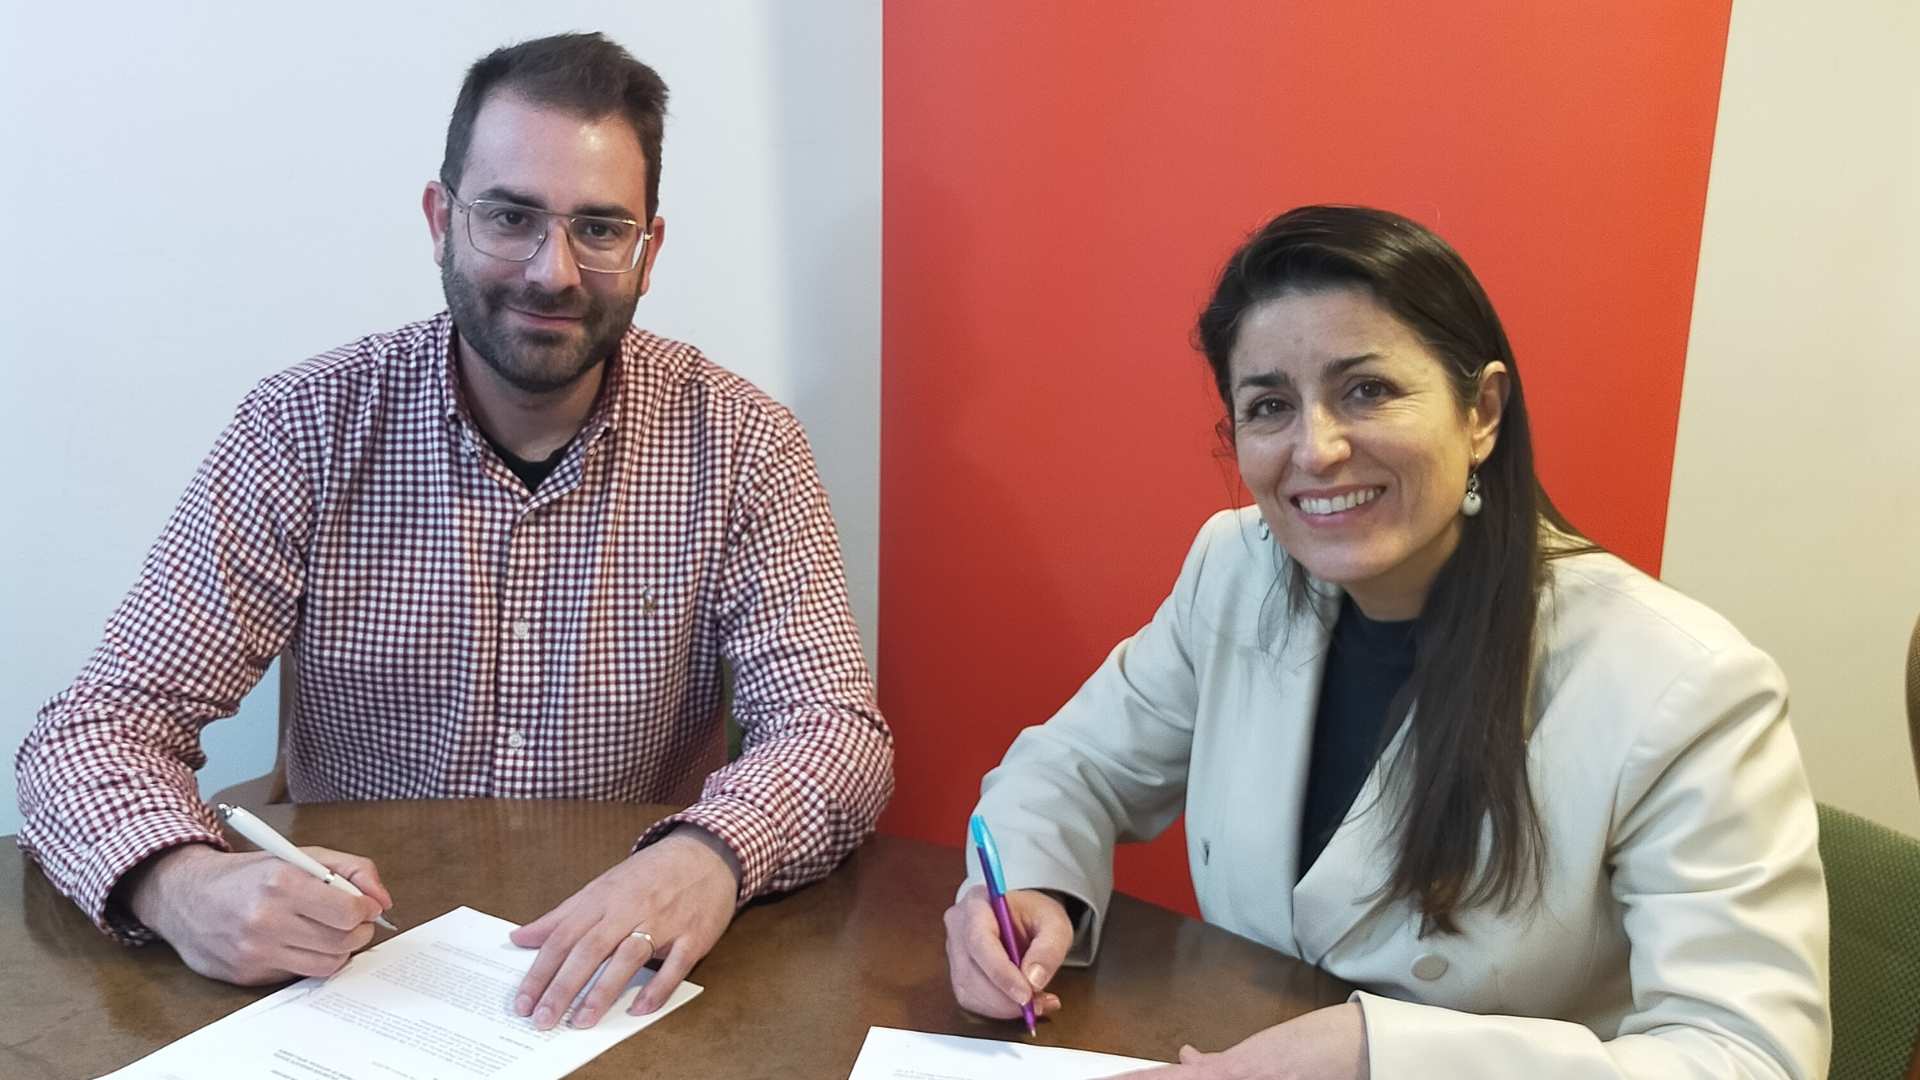 The Unió de Periodistes Valencians and ValgrAI Sign an Agreement to Boost Innovation in Journalism and Artificial Intelligence